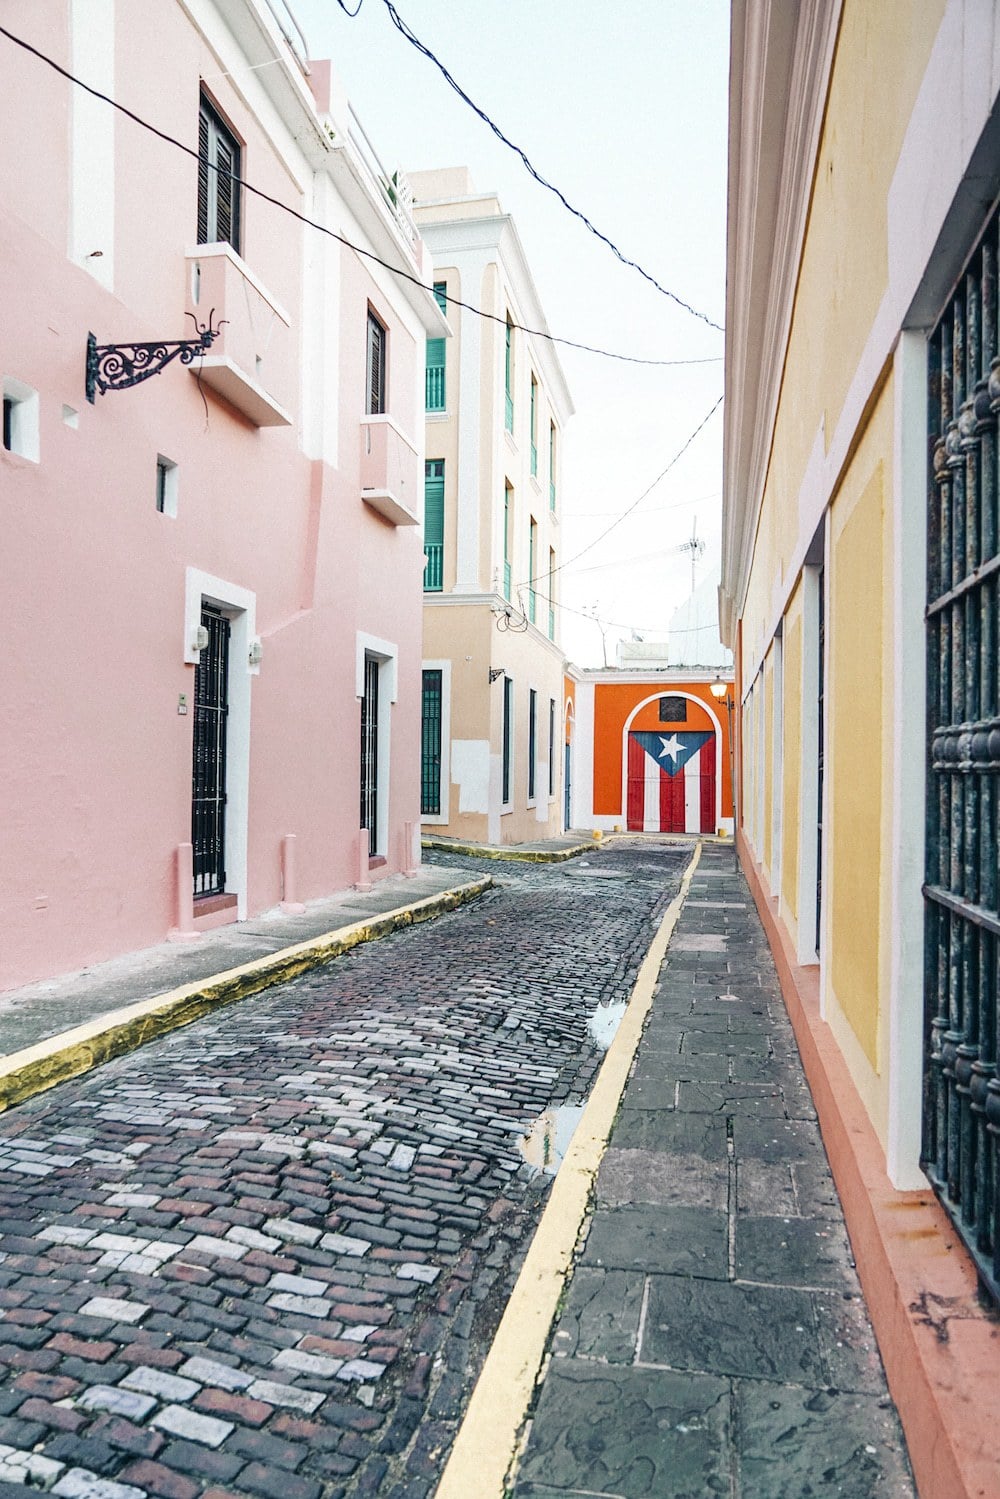 21 Photos to Inspire You to Visit Puerto Rico